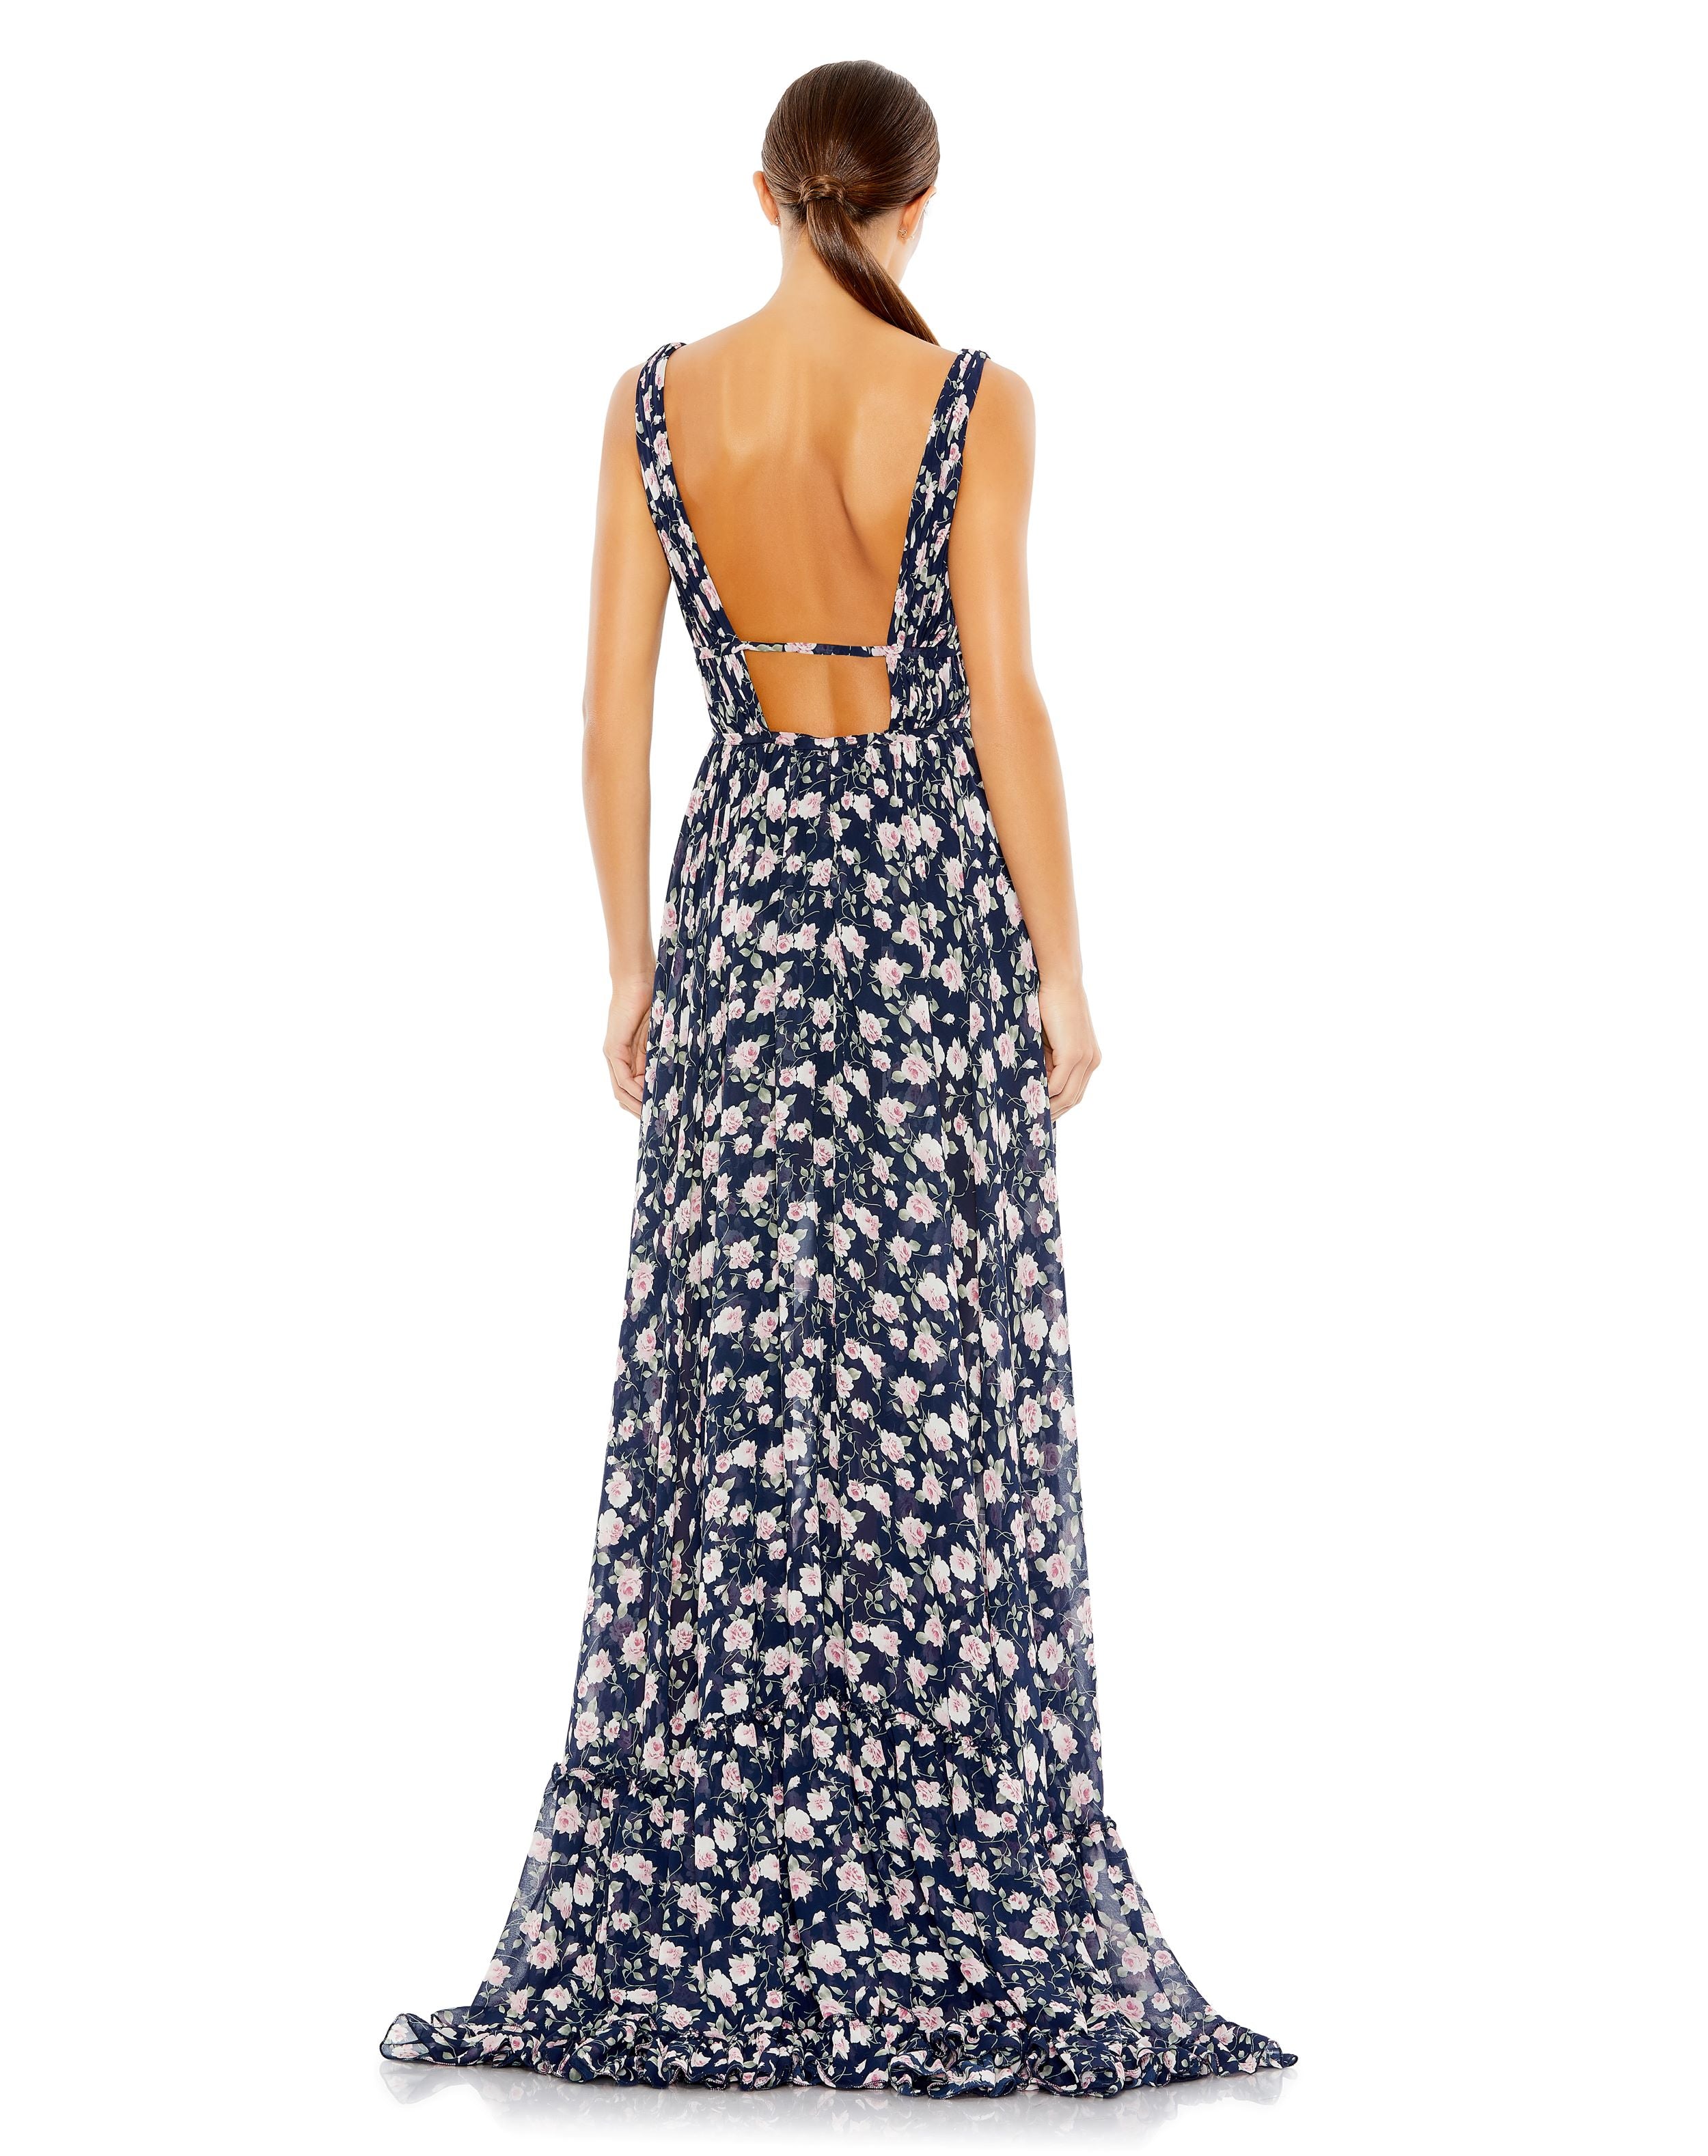 Floral Print Sleeveless Ruffled High-Low Gown